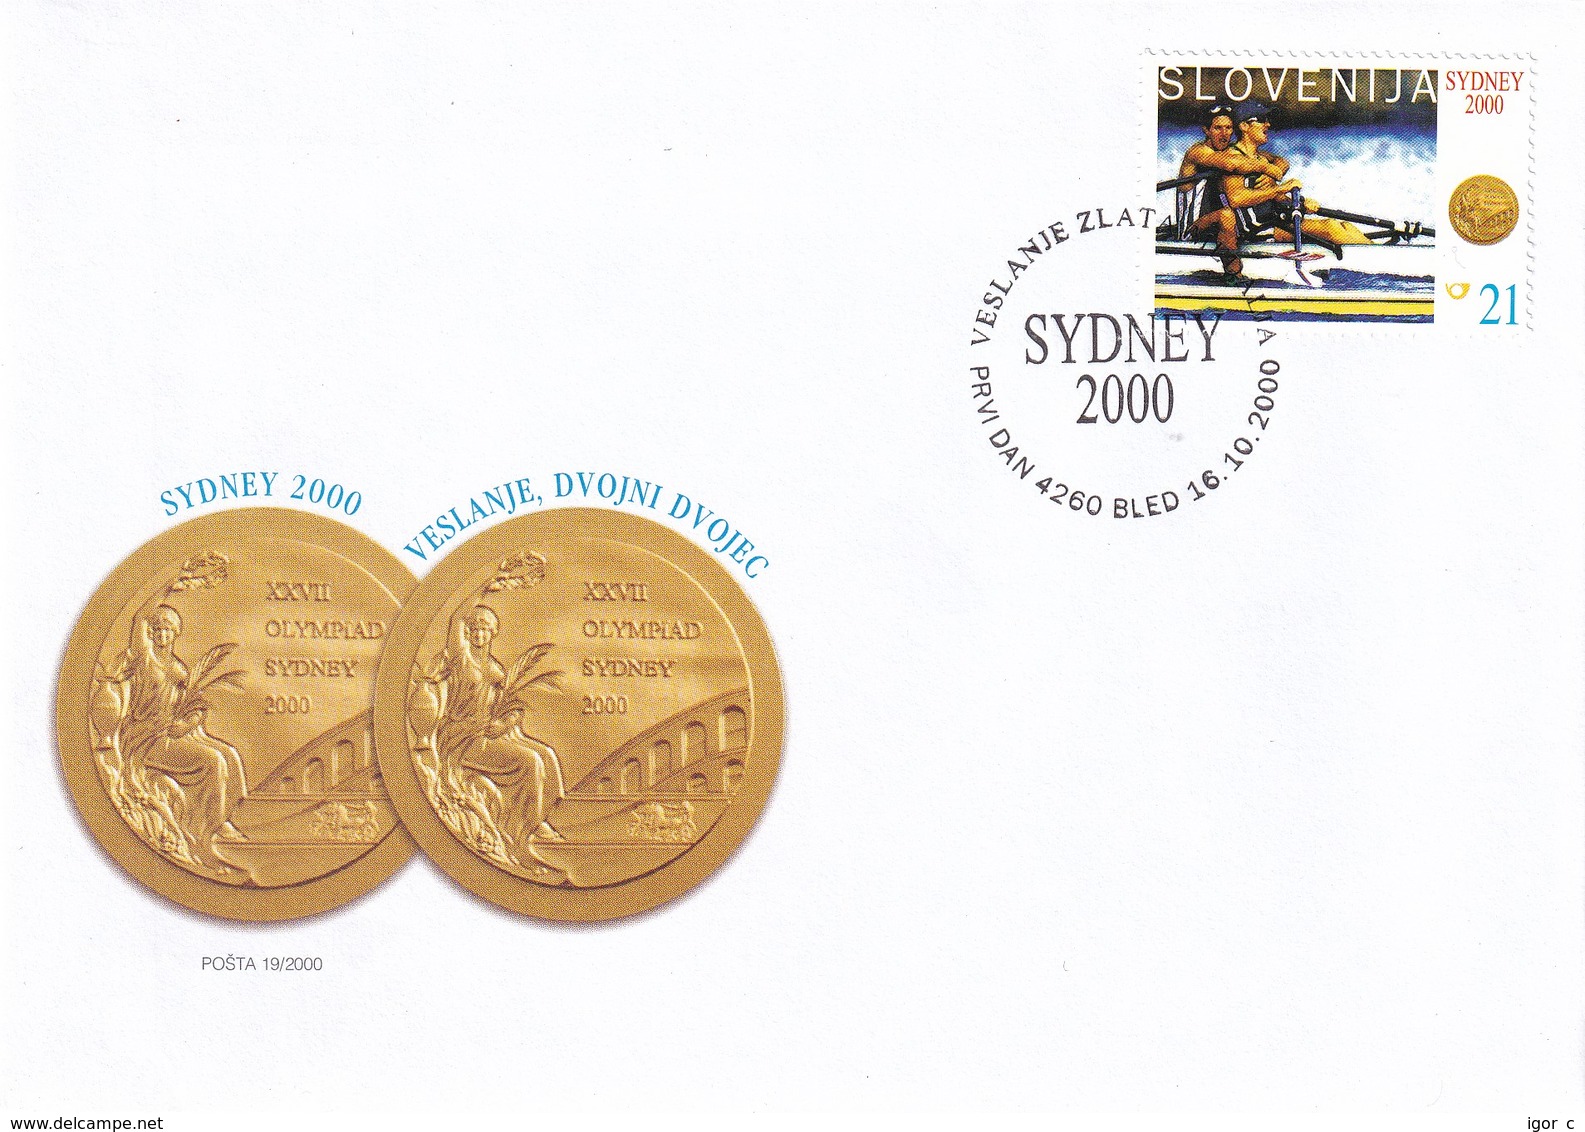 Slovenia Slovenie Slowenien 2000 FDC Cover: Olympic Games Sydney Rowing; Gold Medals Cop - Spik, - Sommer 2000: Sydney - Paralympics